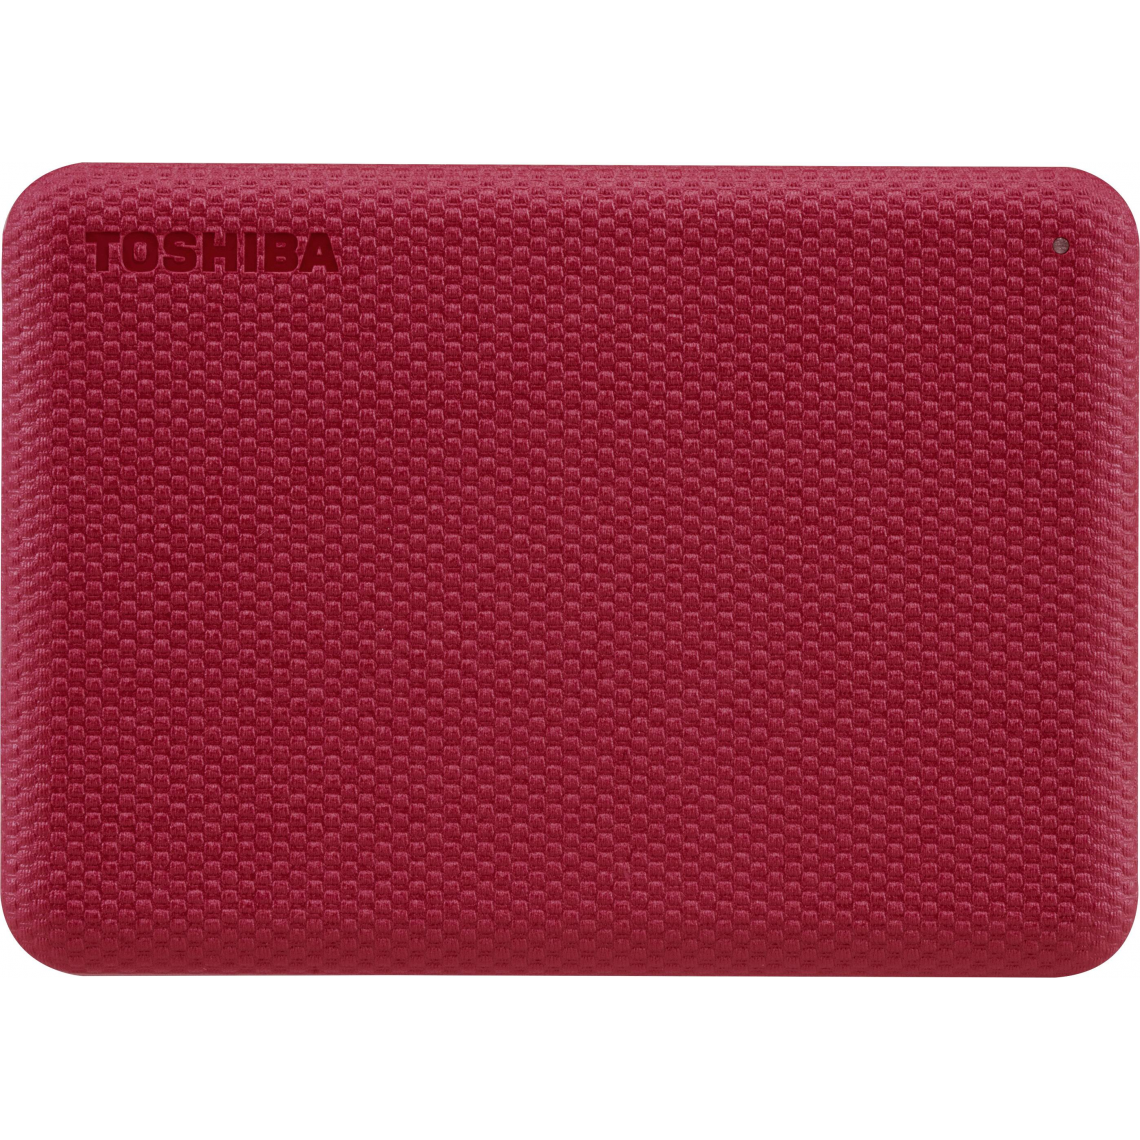 Toshiba - CANVIO ADVANCE 2 To rouge - Disque Dur externe